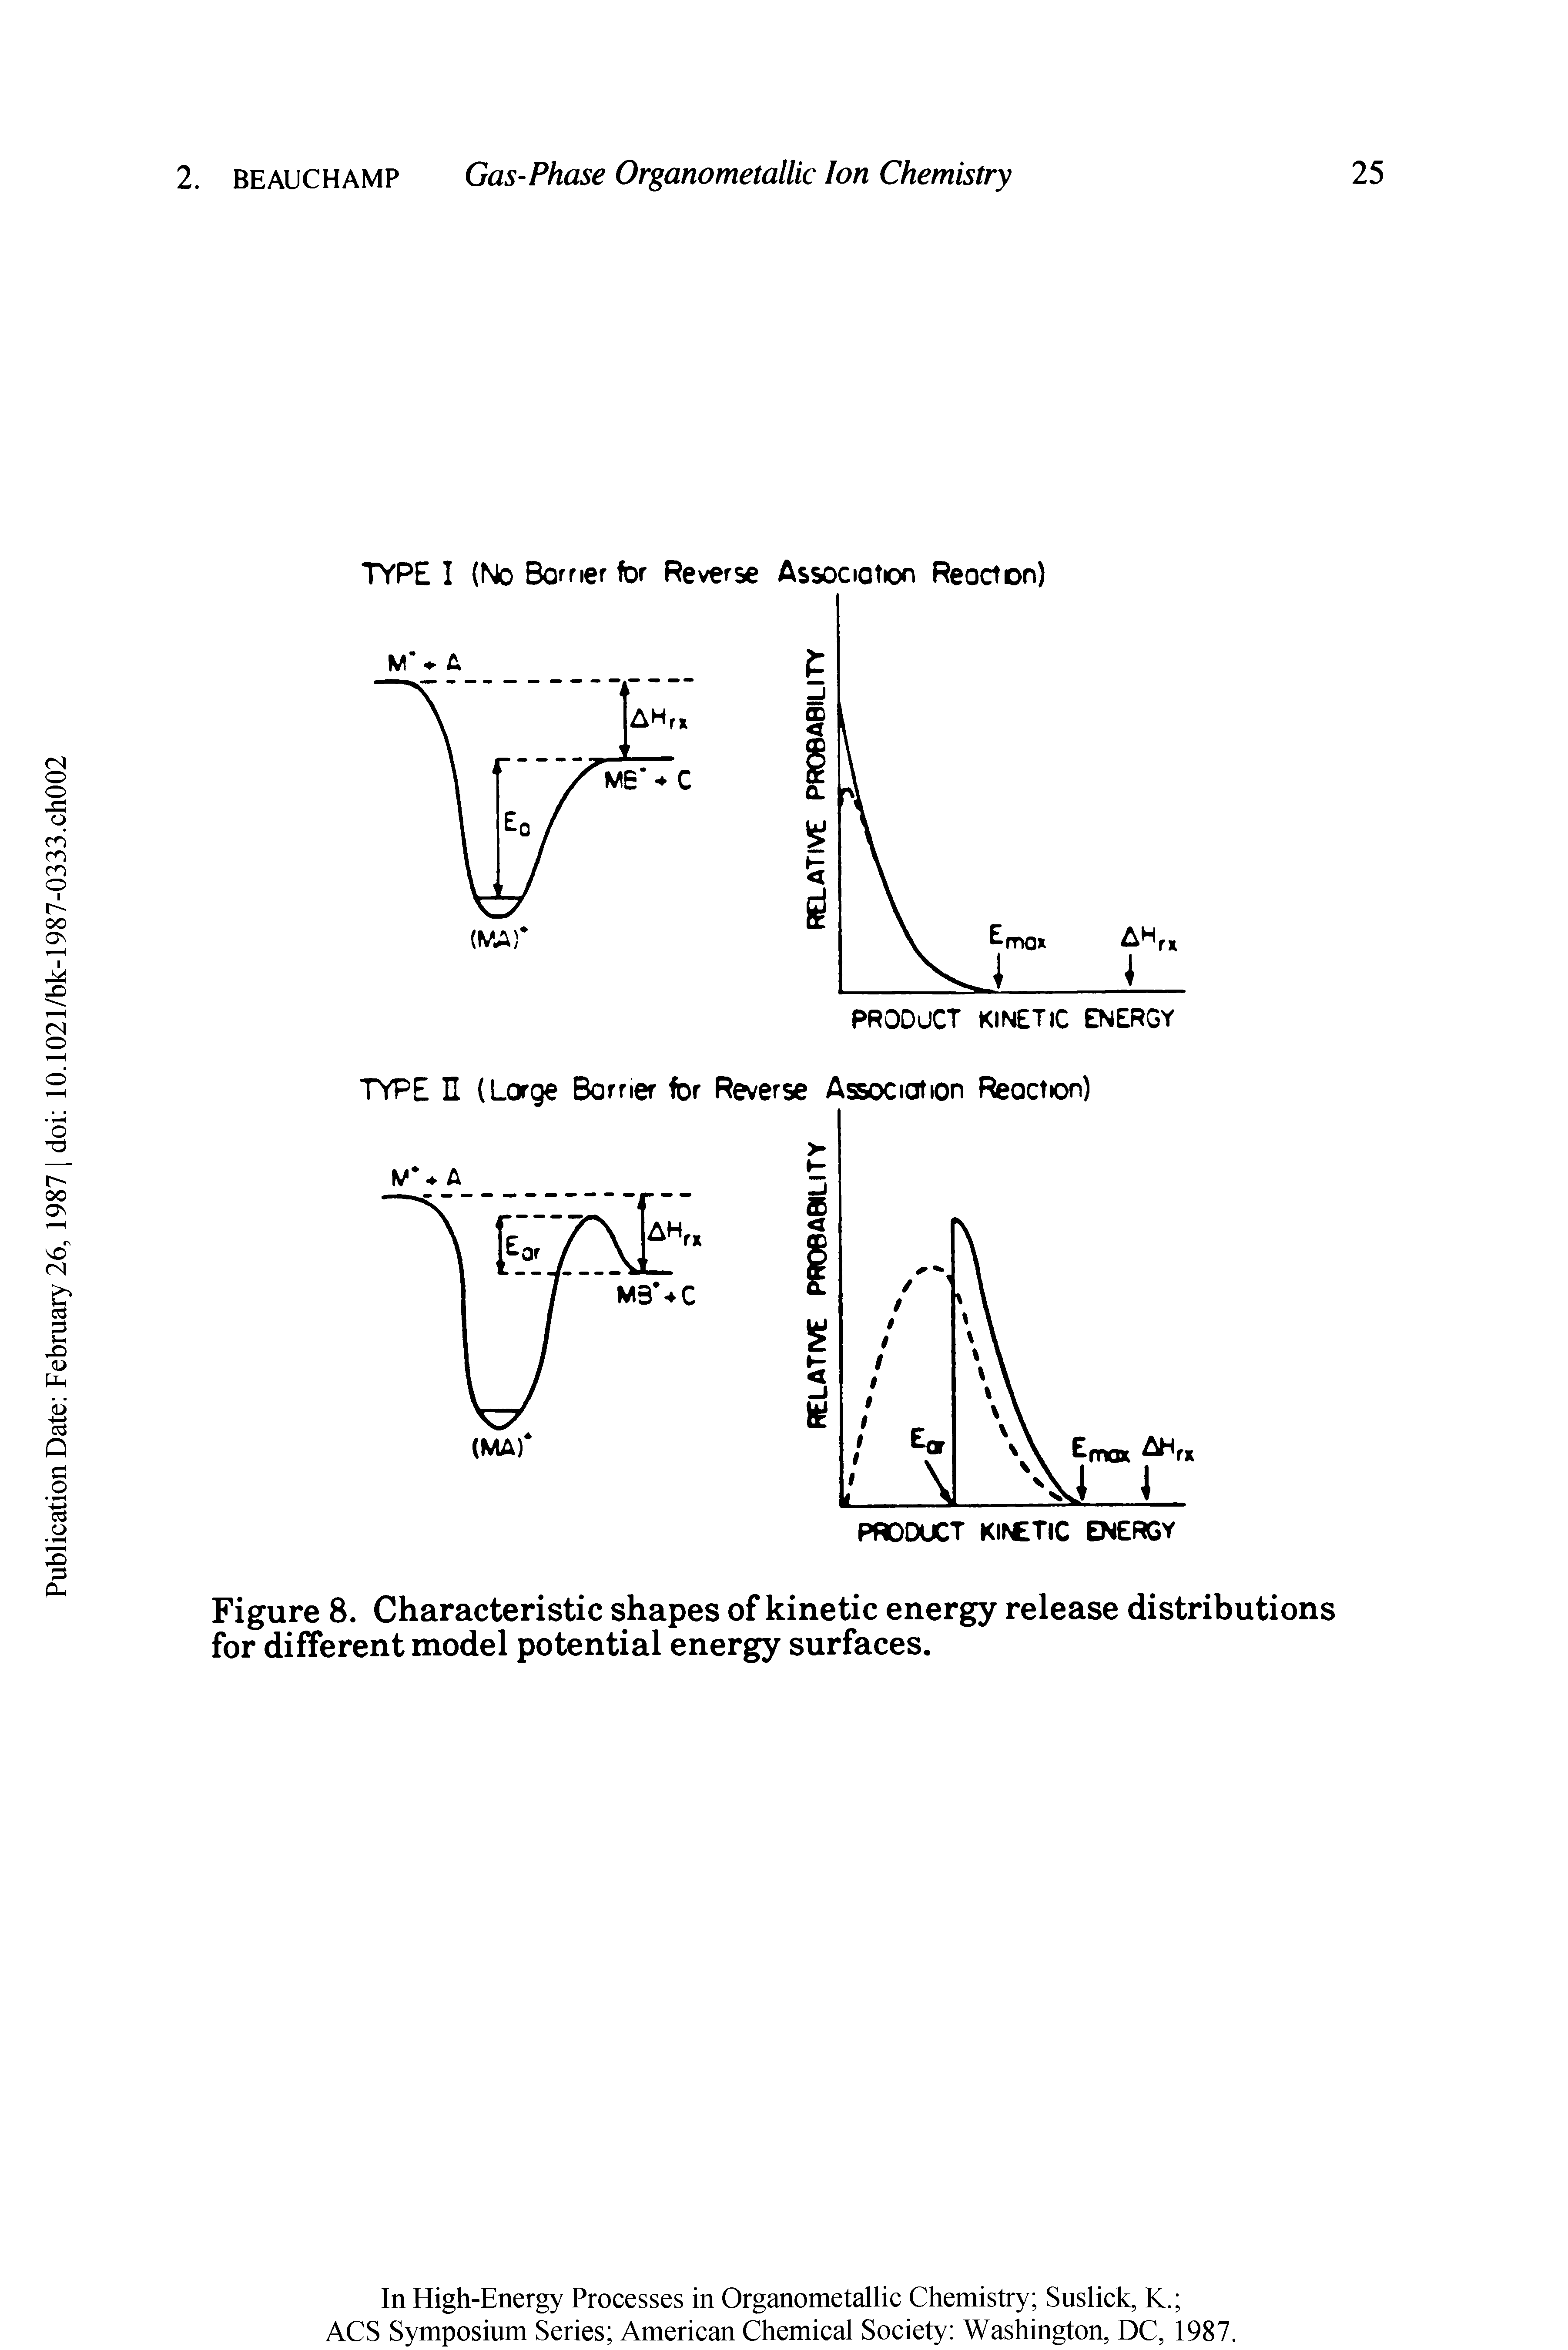 Figure 8. Characteristic shapes of kinetic energy release distributions for different model potential energy surfaces.